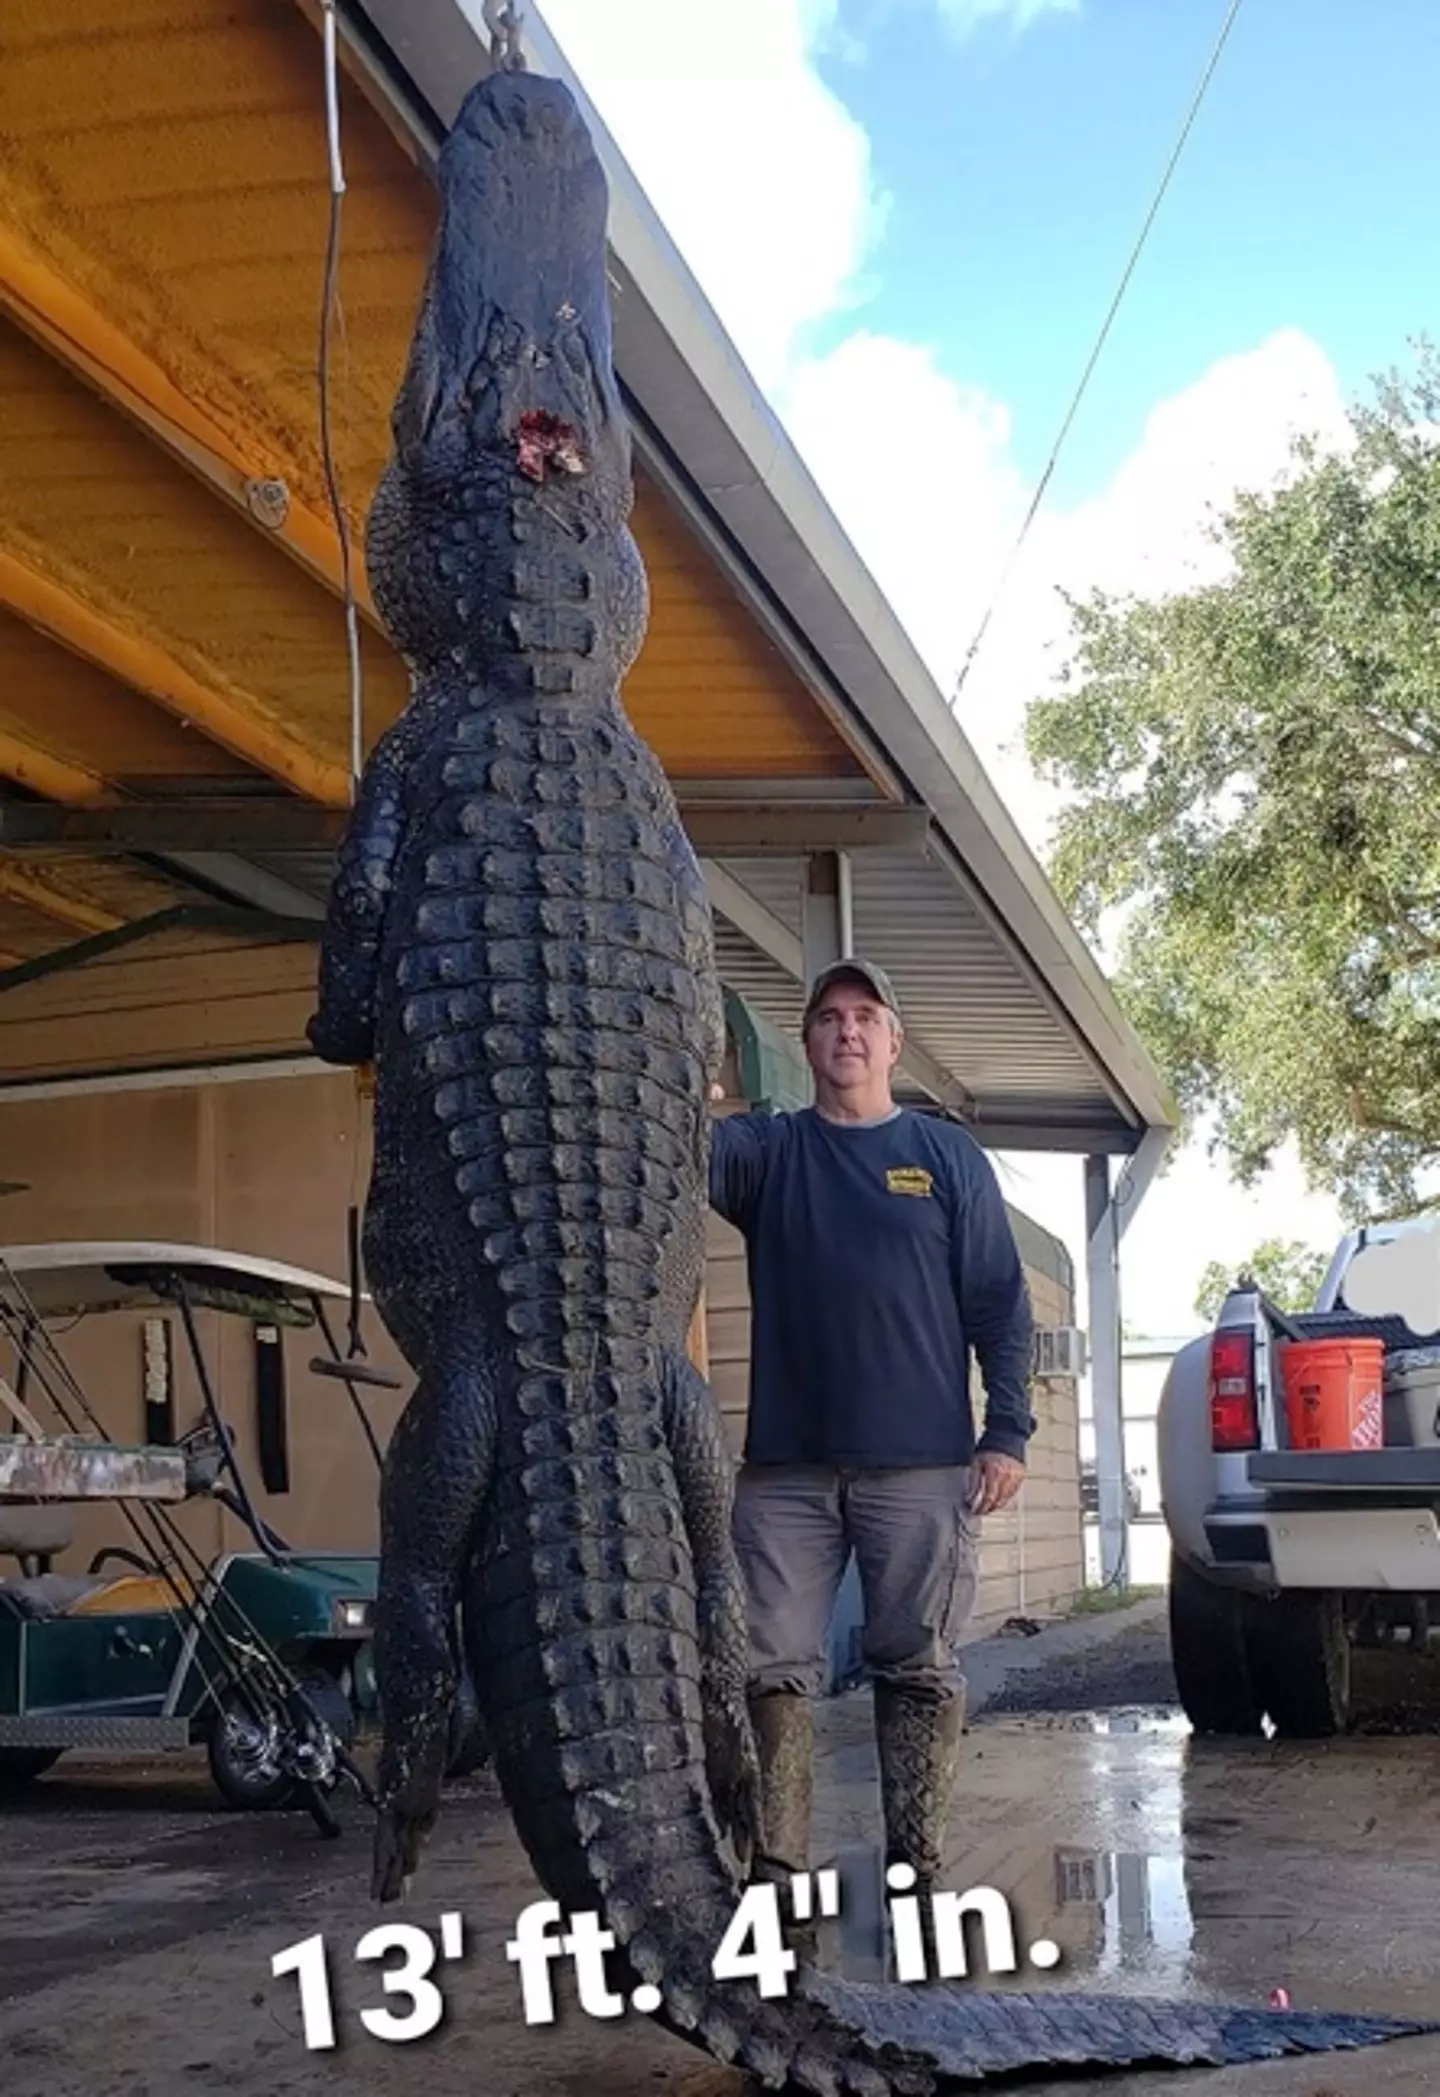 Doug Borries shot the 80-year-old alligator in the head.